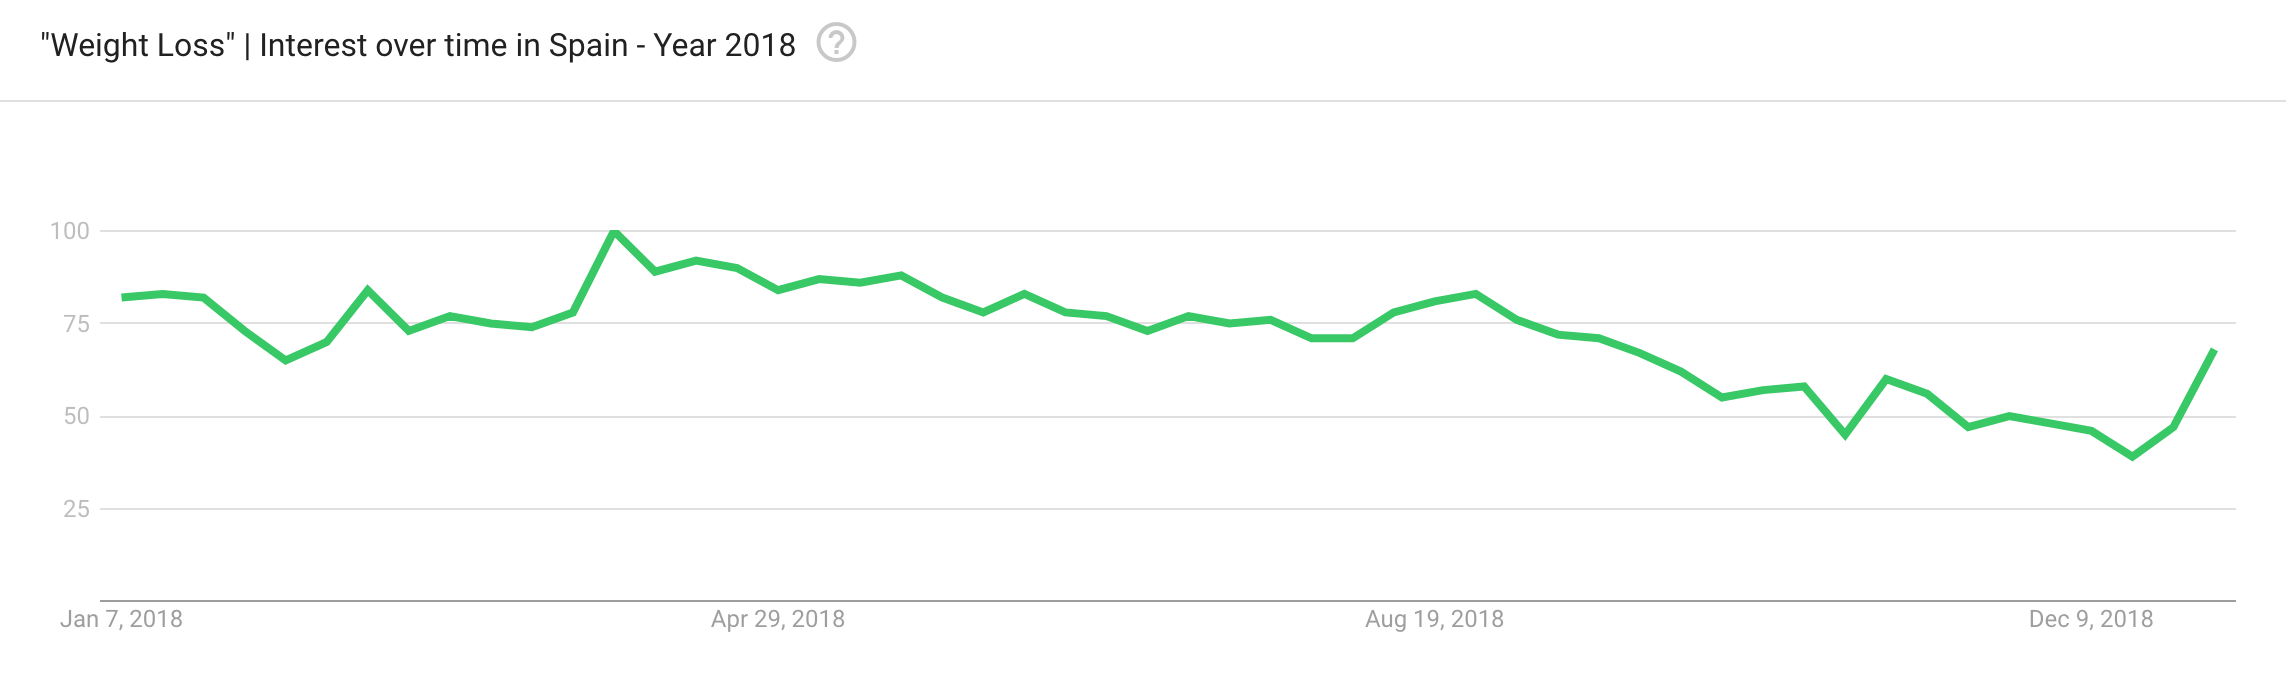 Google searches for ‘Weight Loss’ topic in Spain during 2018.